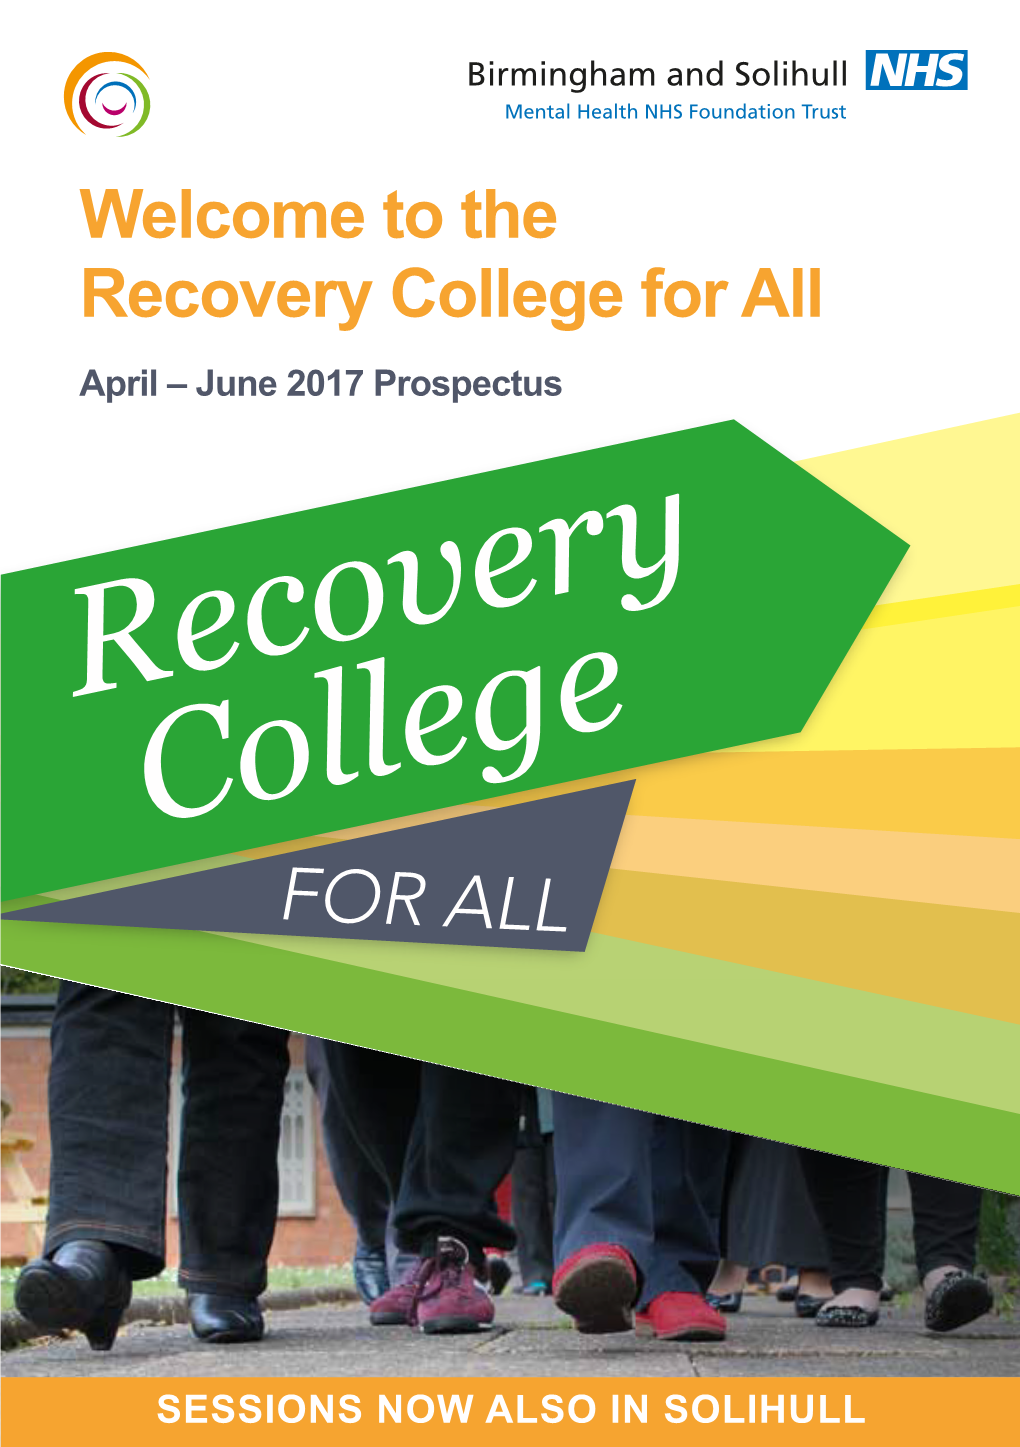 Welcome to the Recovery College for All April – June 2017 Prospectus